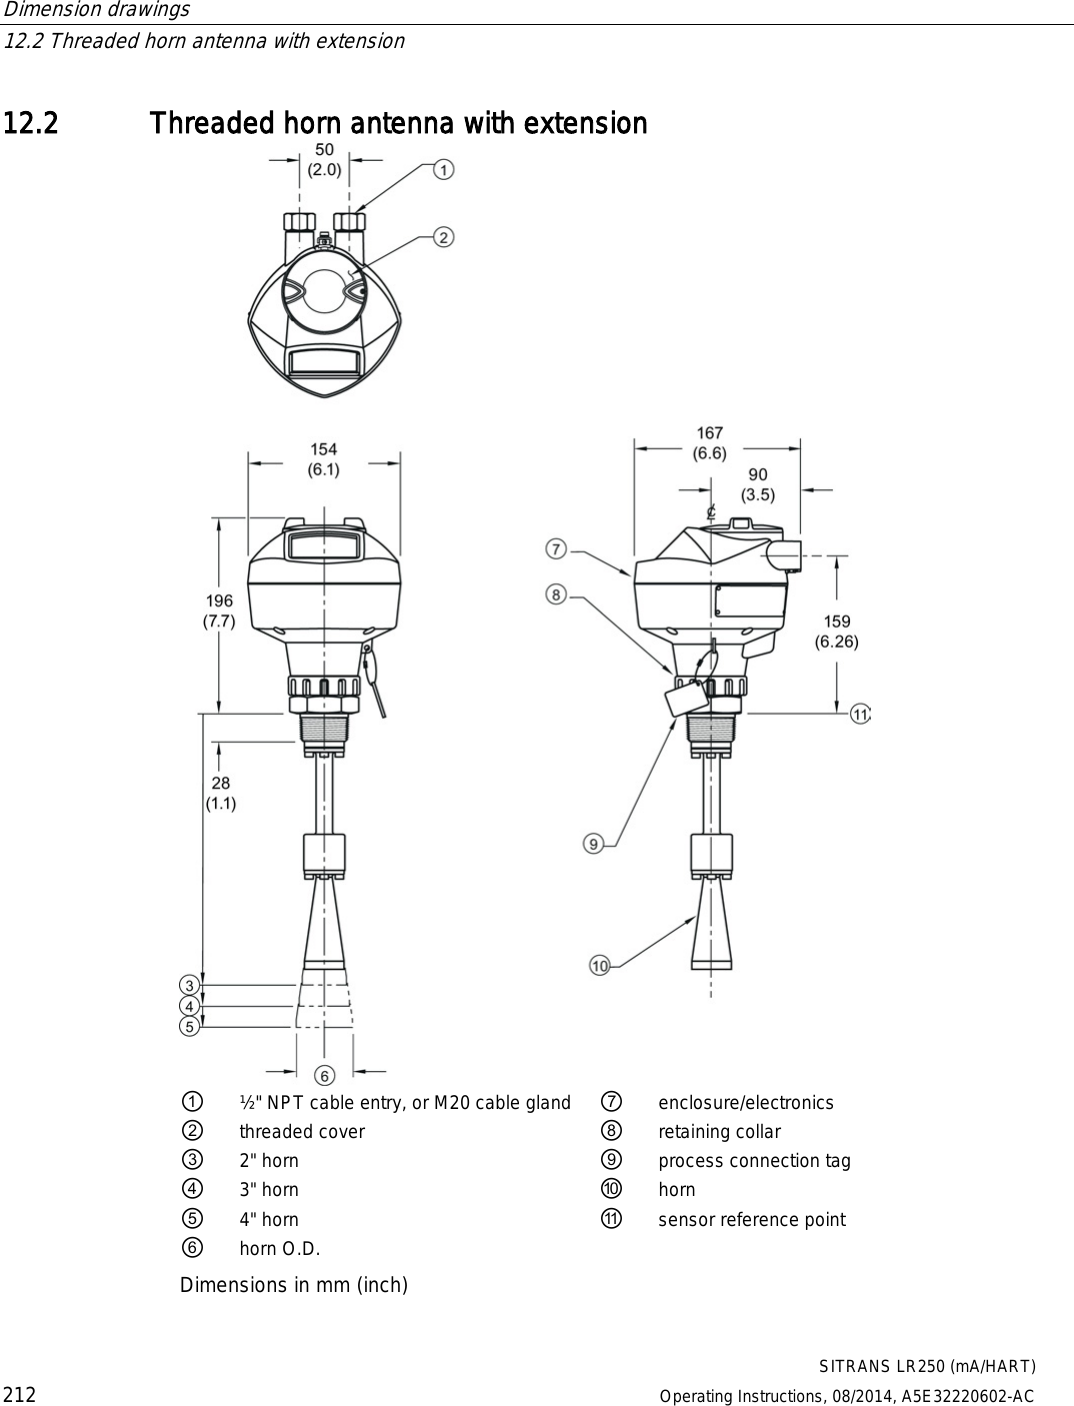 Dimension drawings   12.2 Threaded horn antenna with extension  SITRANS LR250 (mA/HART) 212 Operating Instructions, 08/2014, A5E32220602-AC 12.2 Threaded horn antenna with extension  ① ½&quot; NPT cable entry, or M20 cable gland ⑦ enclosure/electronics ② threaded cover ⑧ retaining collar ③ 2&quot; horn ⑨ process connection tag ④ 3&quot; horn ⑩ horn ⑤ 4&quot; horn ⑪ sensor reference point ⑥ horn O.D.   Dimensions in mm (inch) 